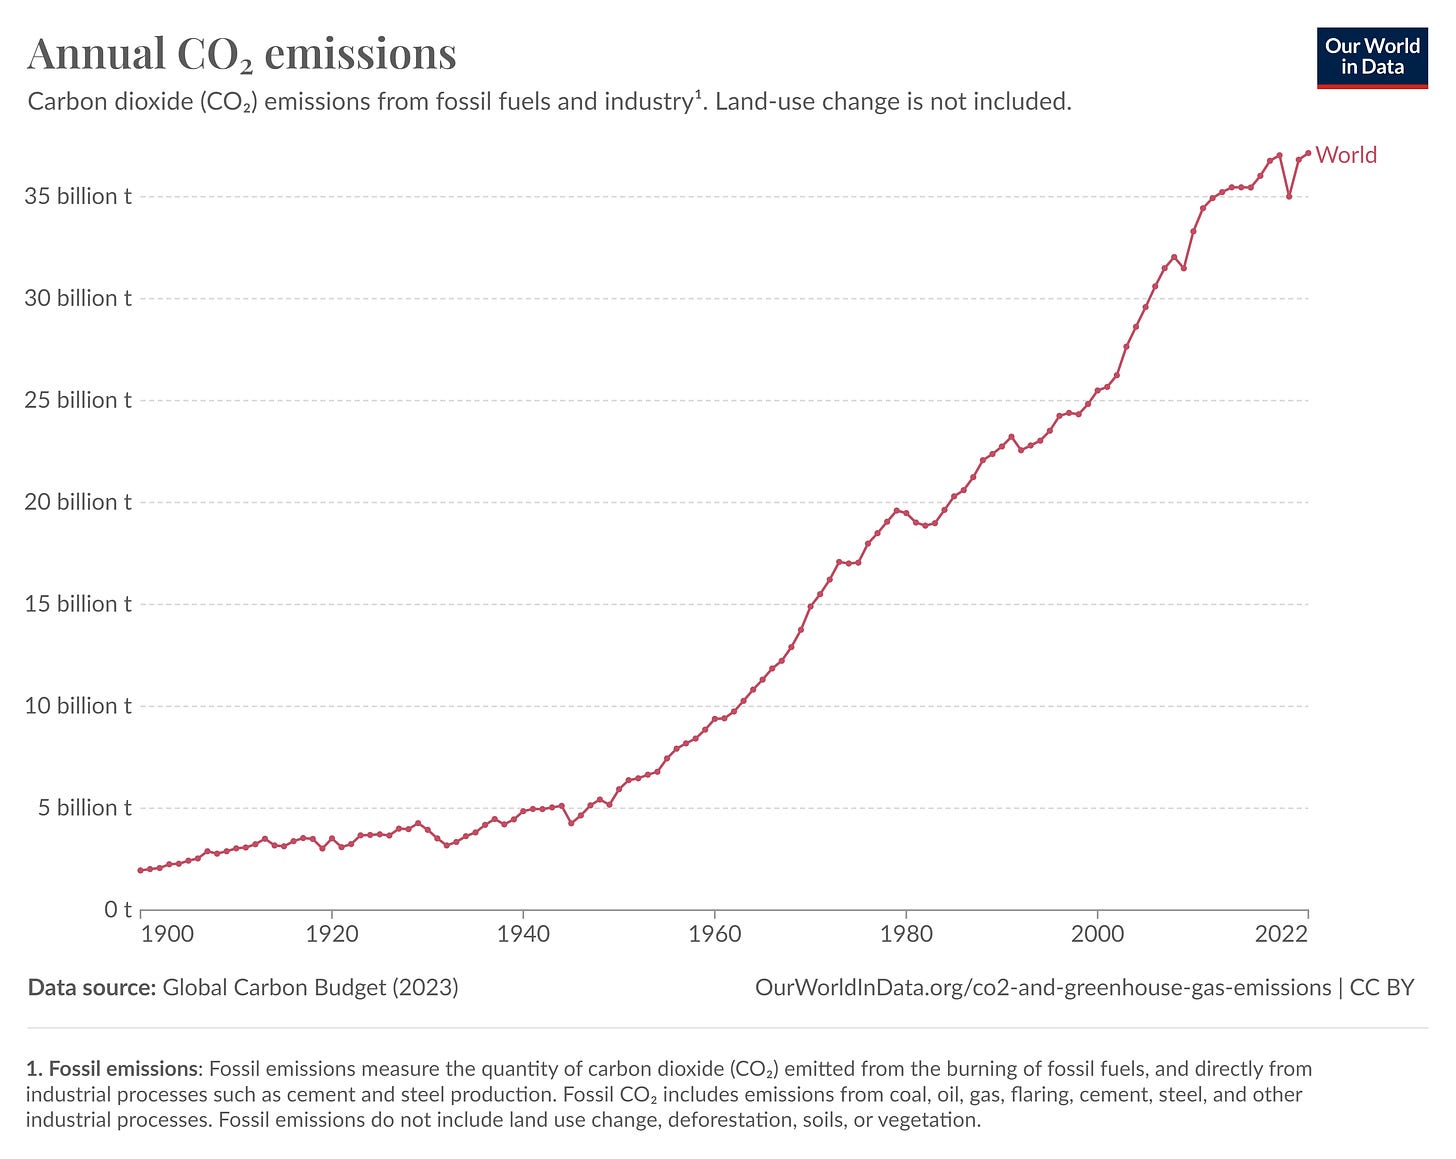 Figure 2 - Global CO2 Emissions from 1900 to 2022 (Source - Our World in Data)